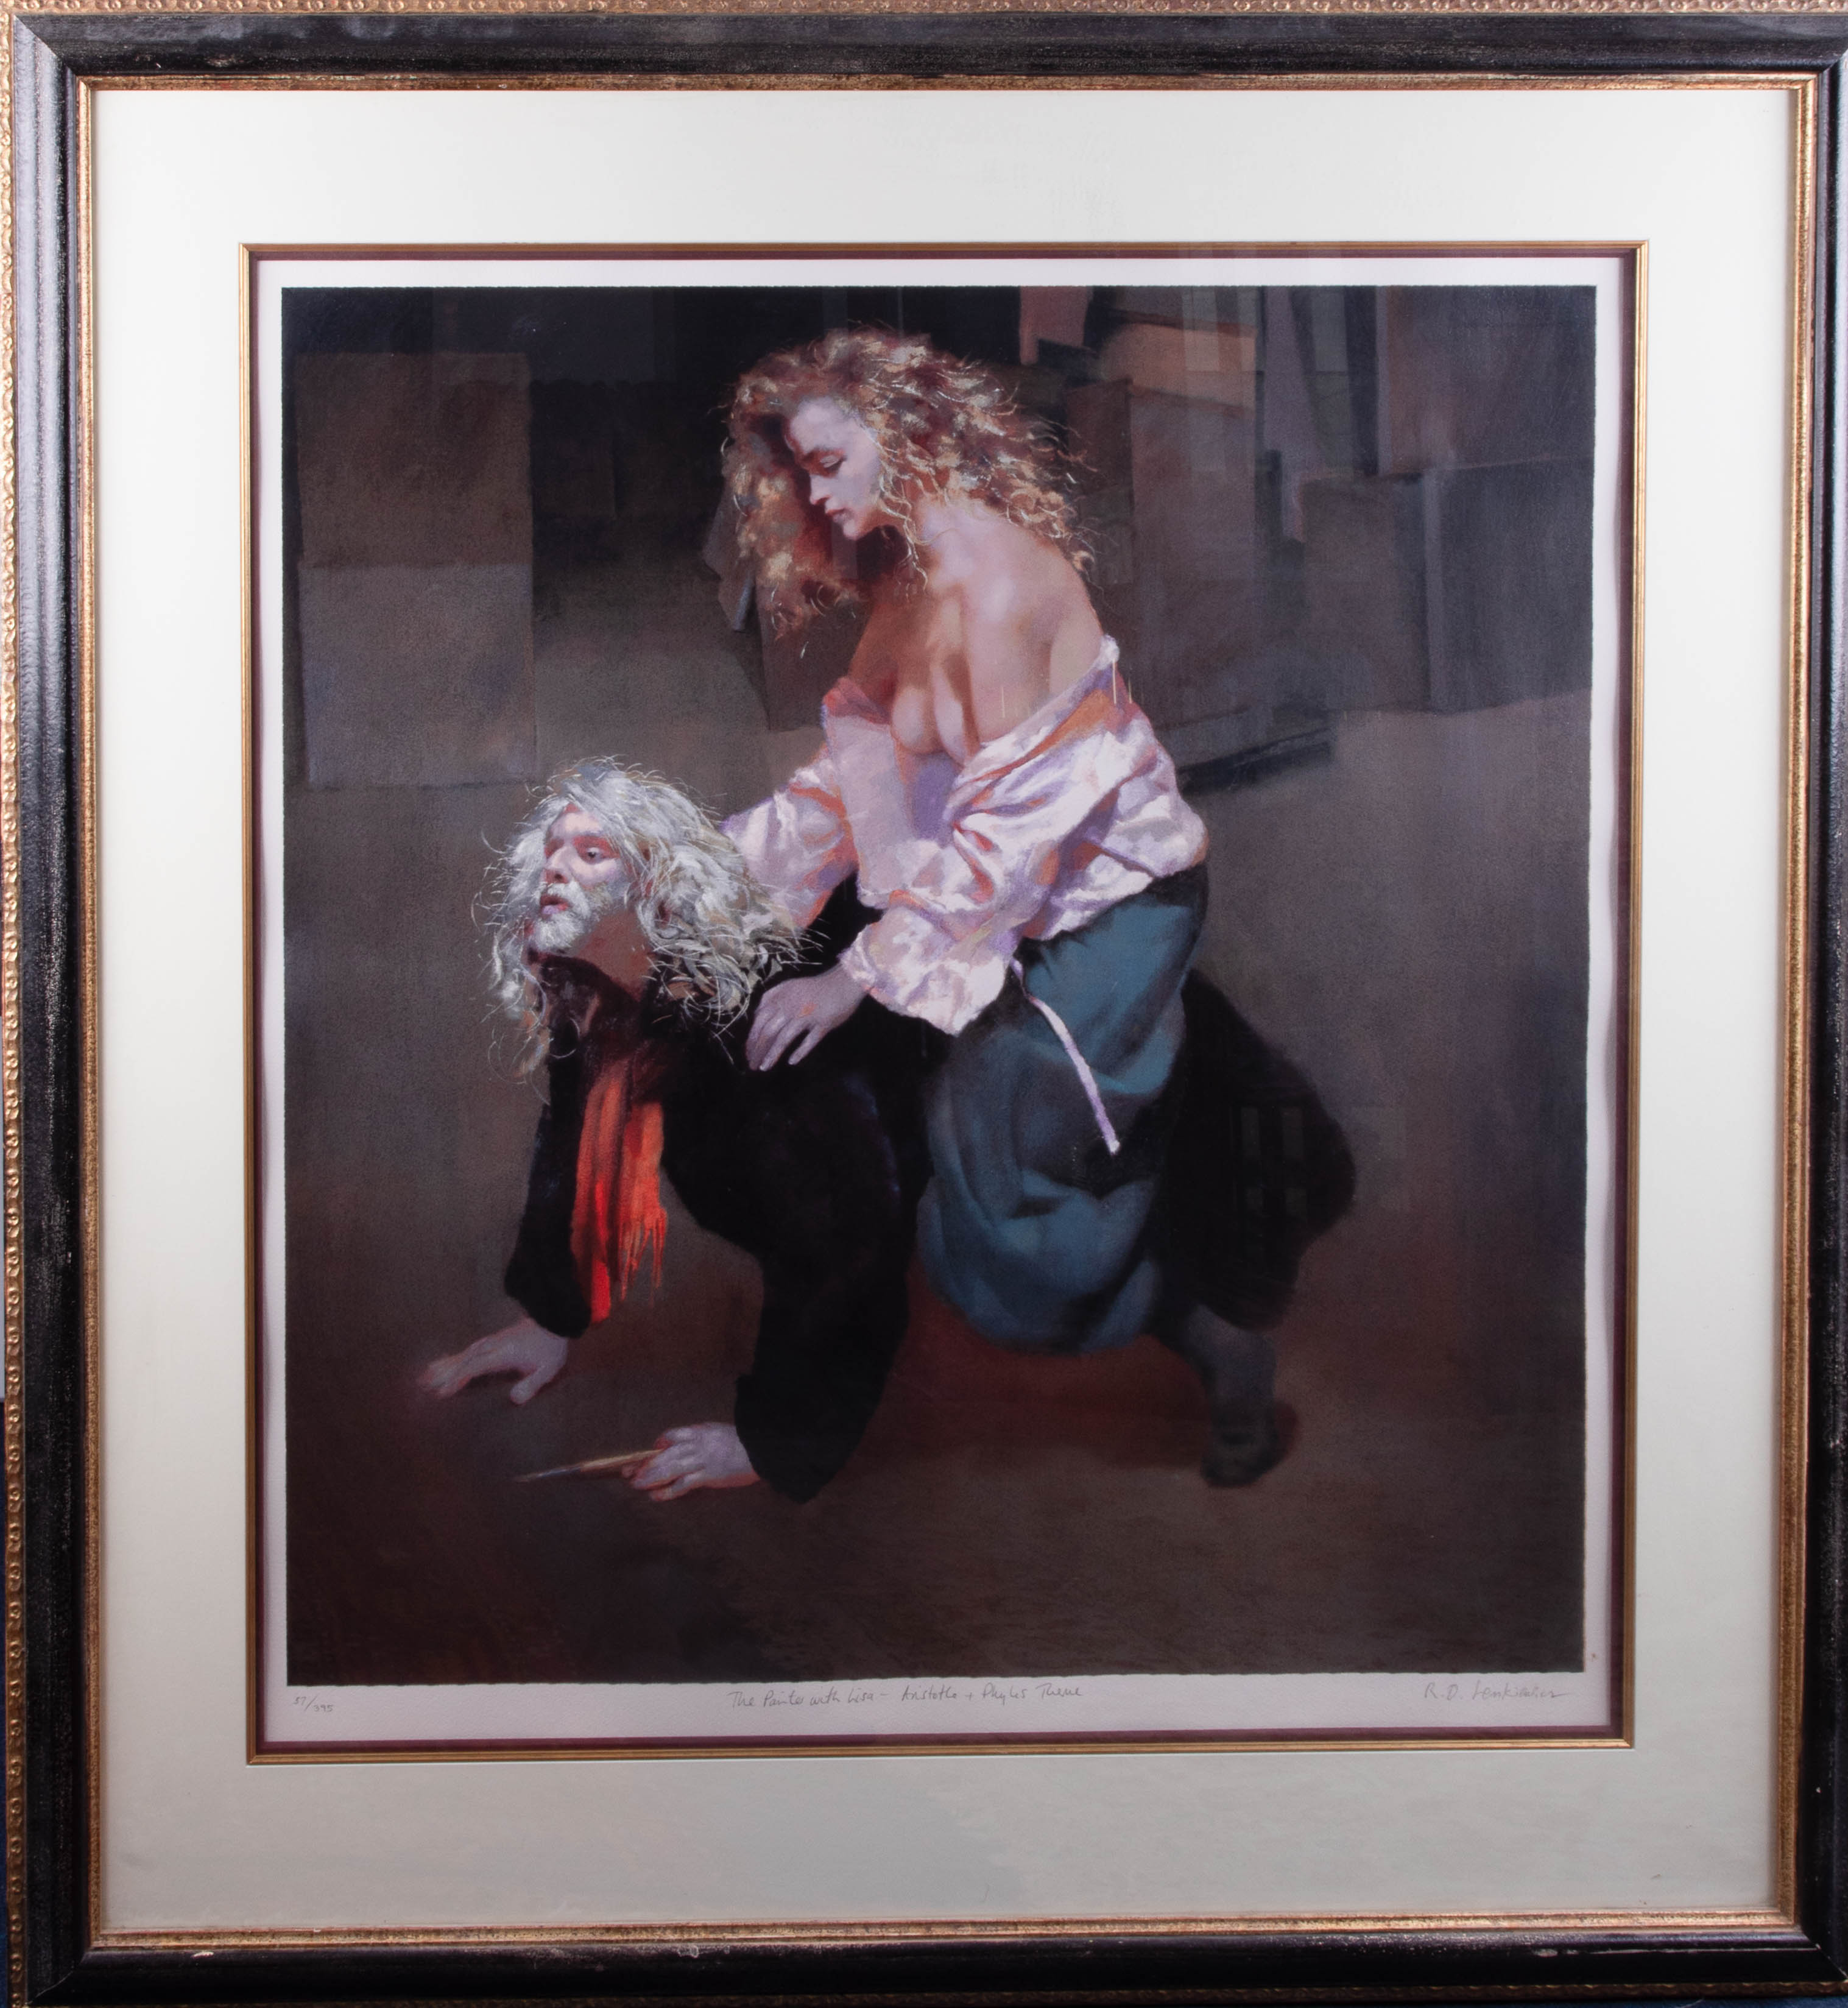 Robert Lenkiewicz, 'Painter with Lisa - Aristotle Theme', signed limited edition print 57/395,